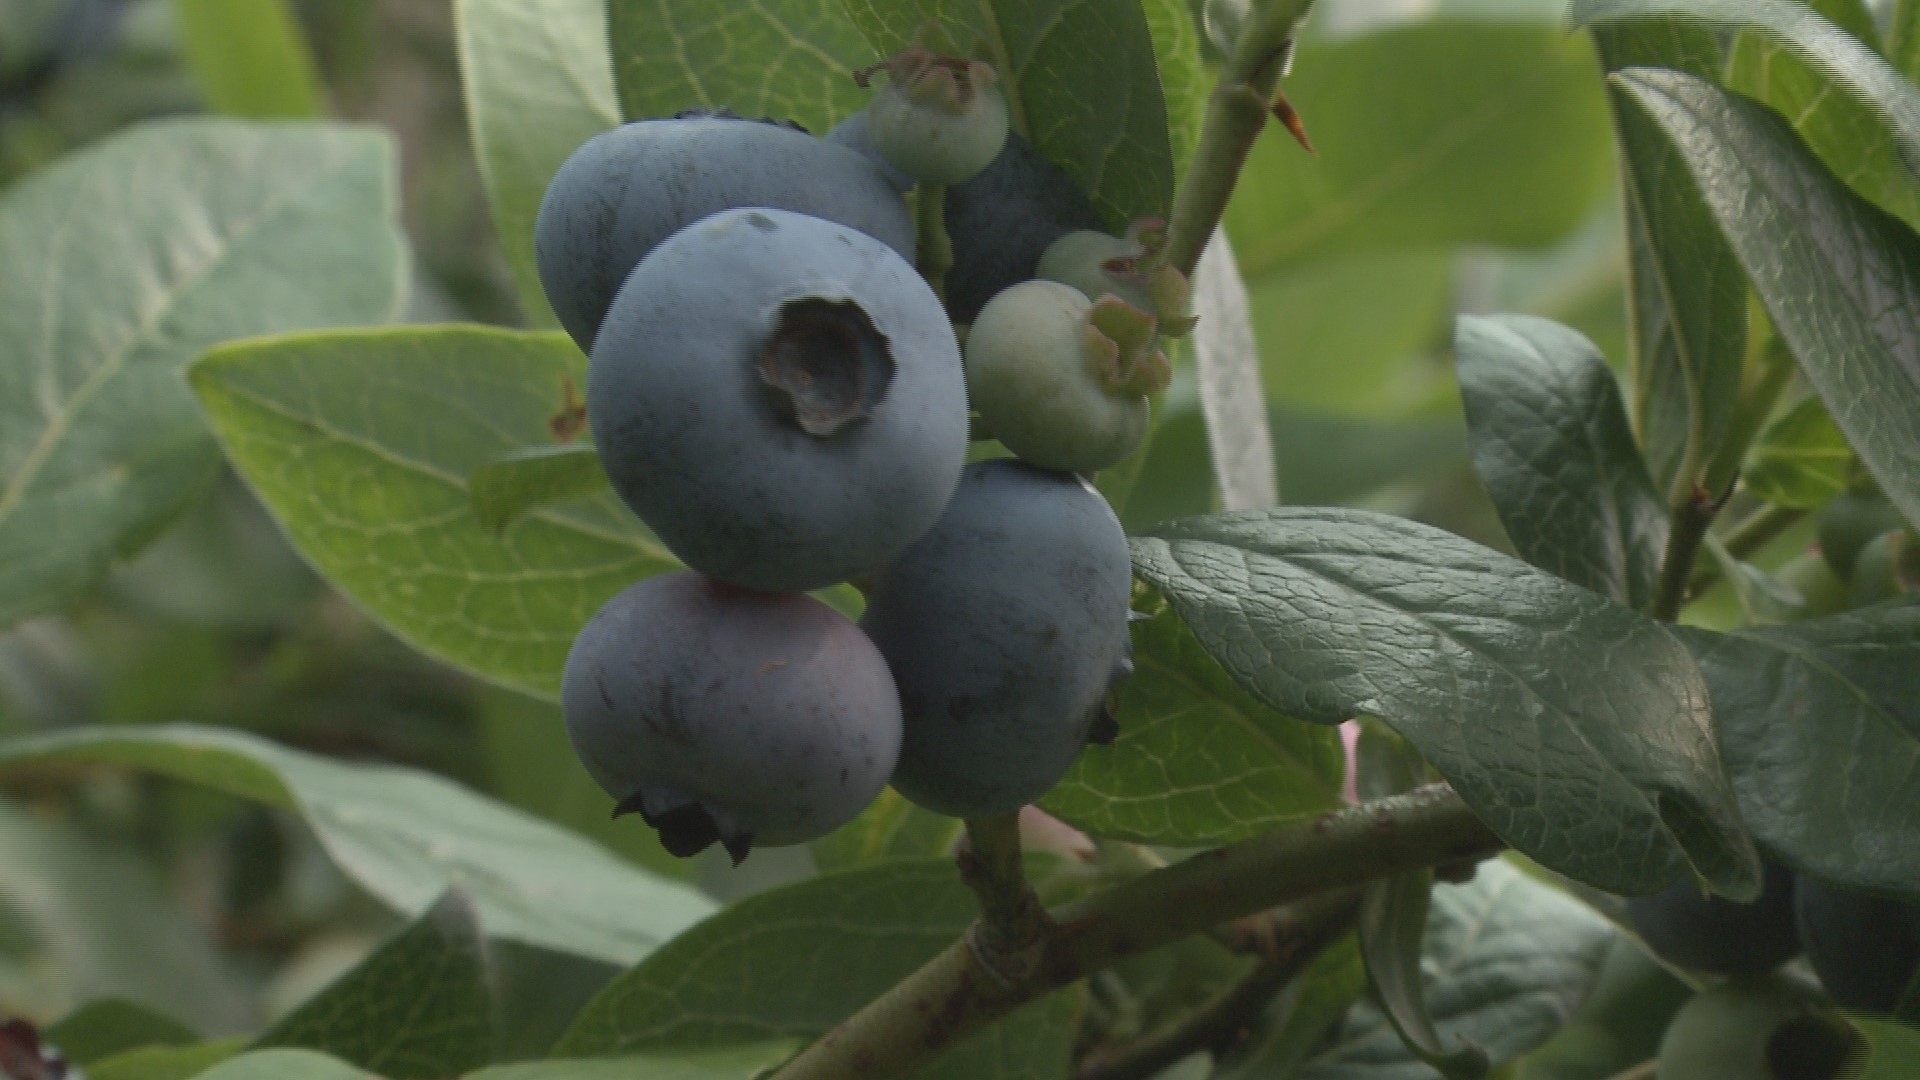 Blueberries are beloved in Maine. Gardening with Gutner learns how to grow highbush blueberries from an expert.